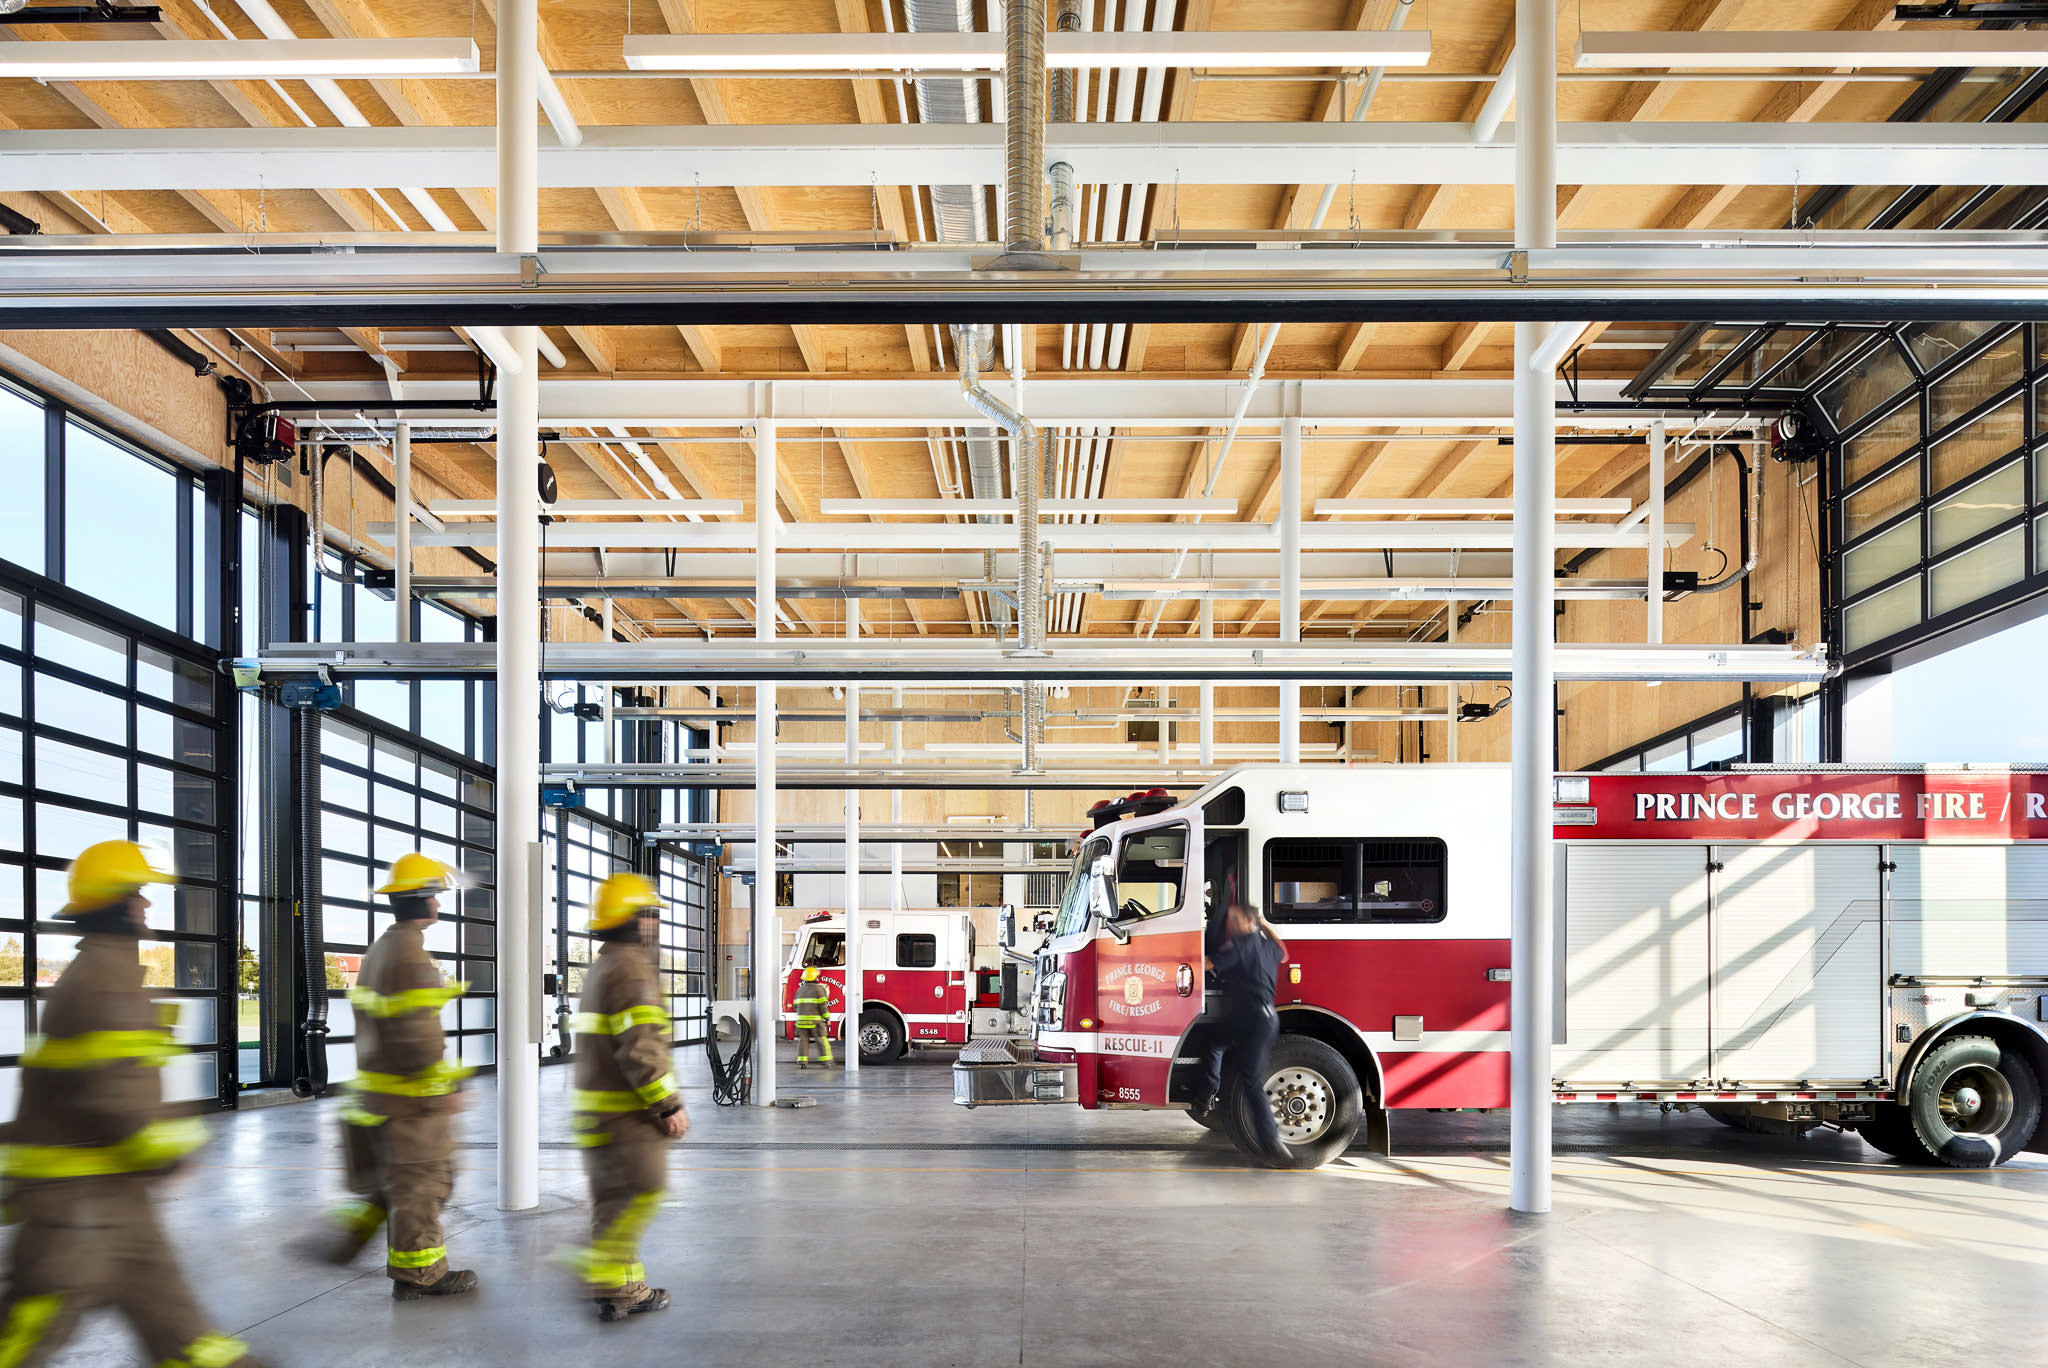 Modern Firehall Garage With Fire Engines And Firefighters